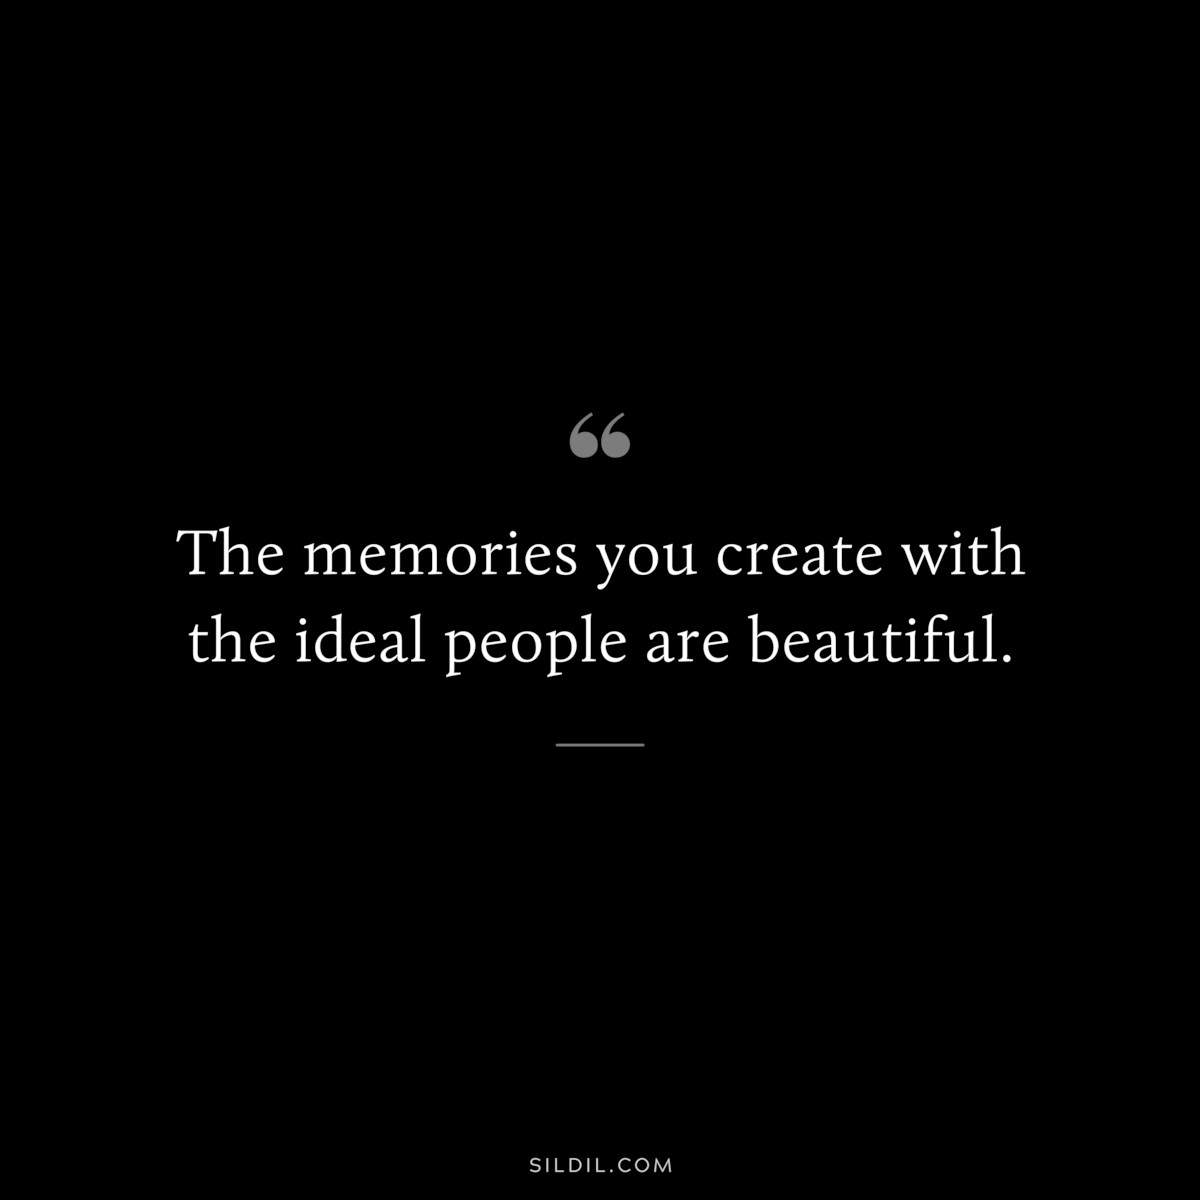 The memories you create with the ideal people are beautiful.